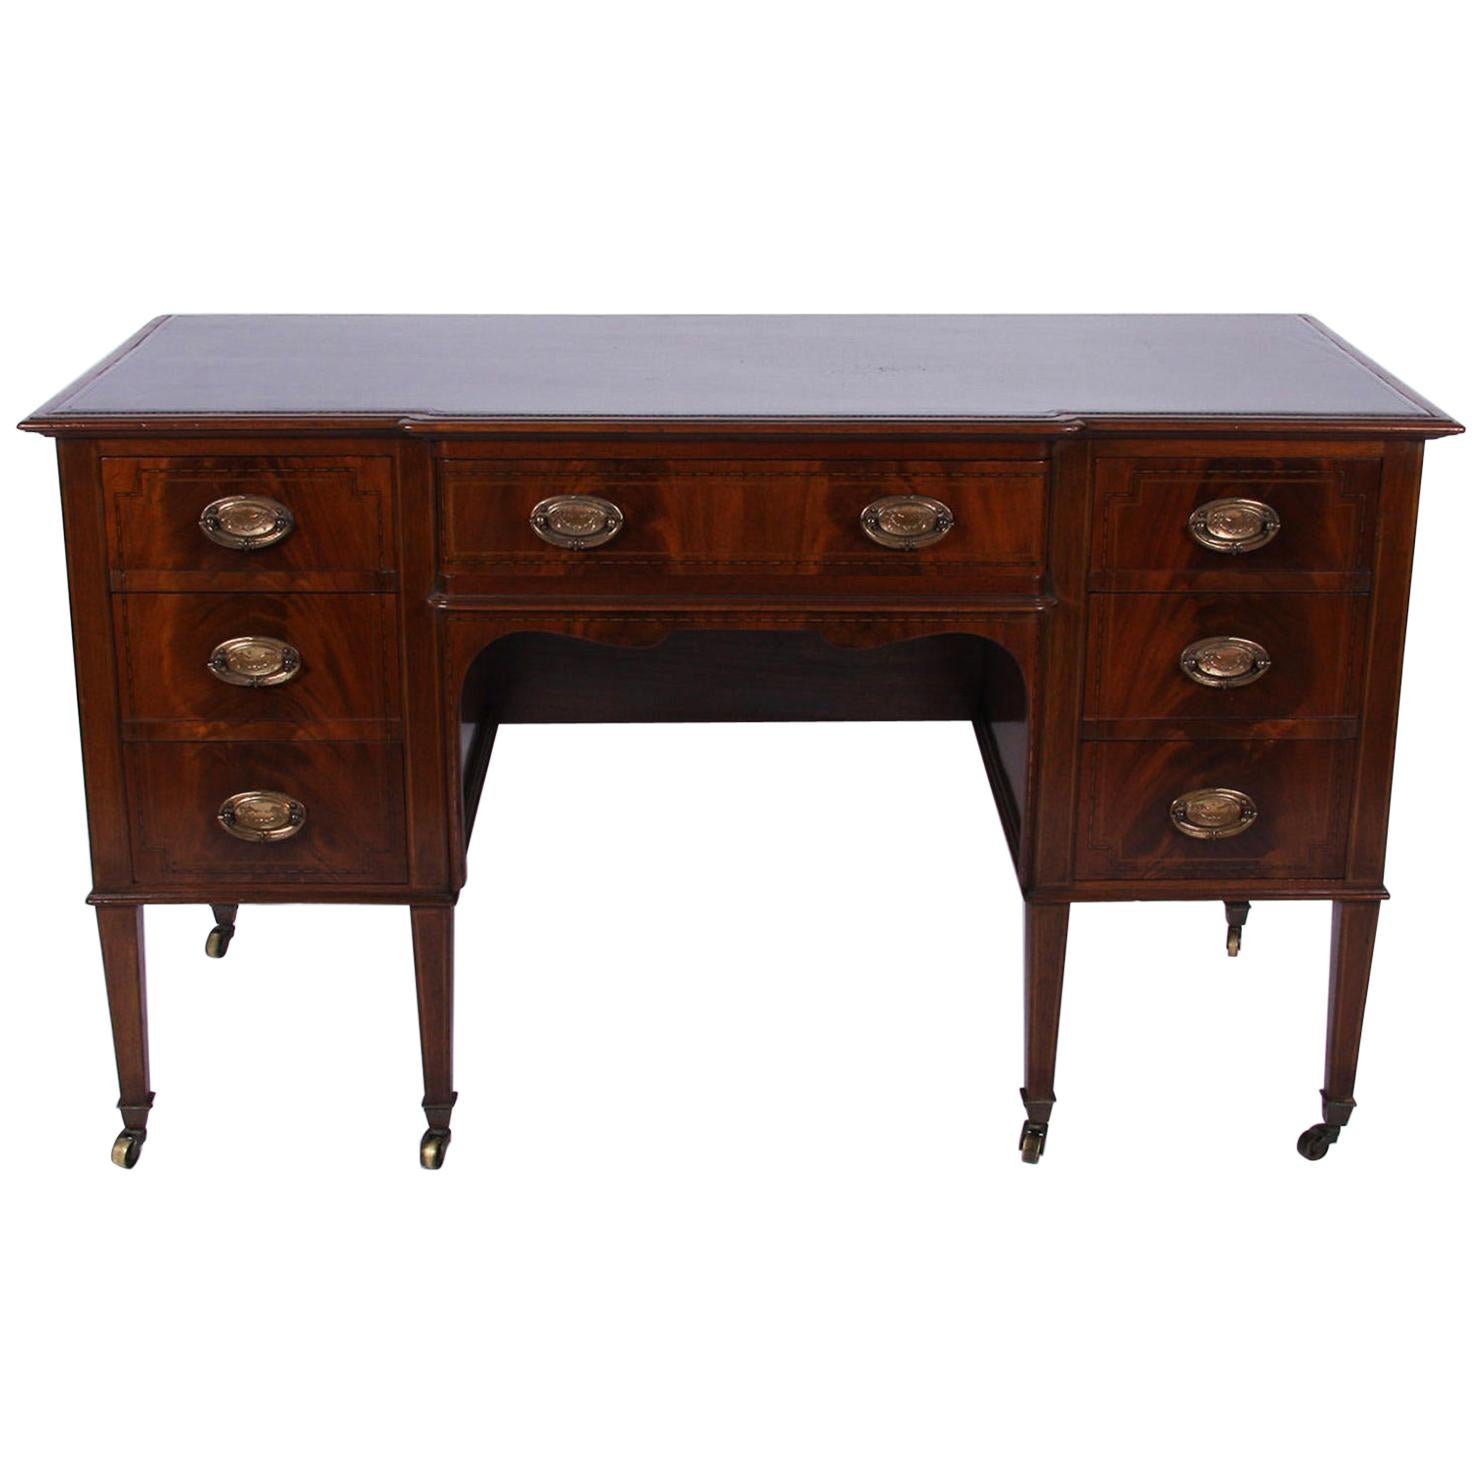 Early 20th Century English Mahogany Kneehole Desk with Leather Top